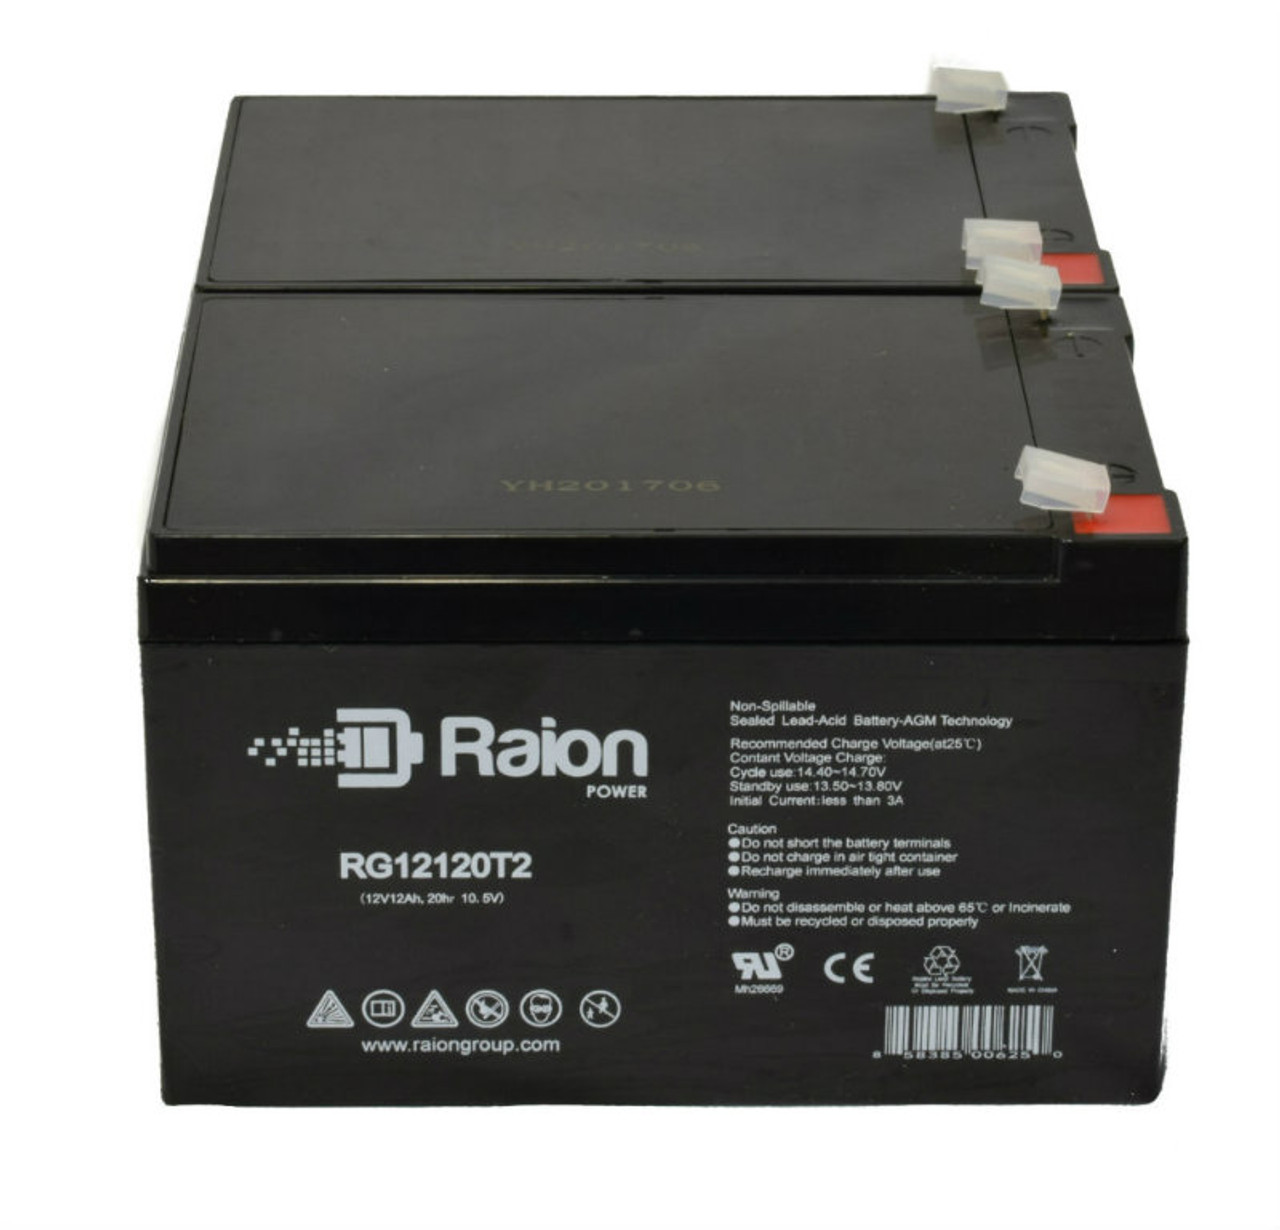 Raion Power 12V 12Ah Non-Spillable Compatible Replacement Battery for Flying Power NH12-55W - (2 Pack)